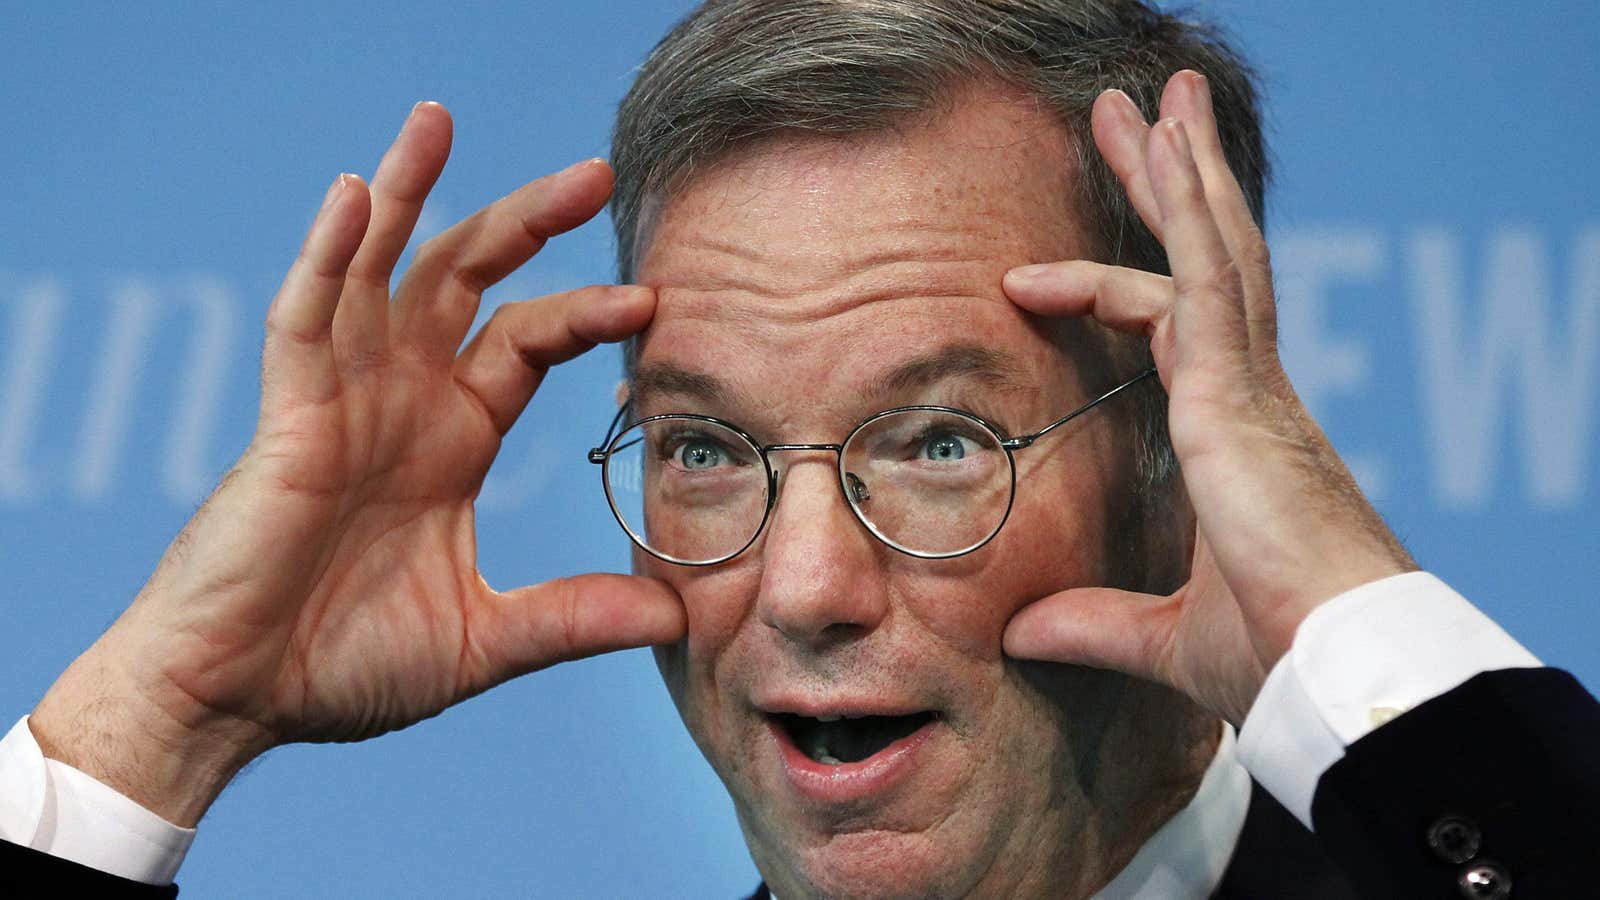 Eric Schmidt has seen the future, and it involves goggles.